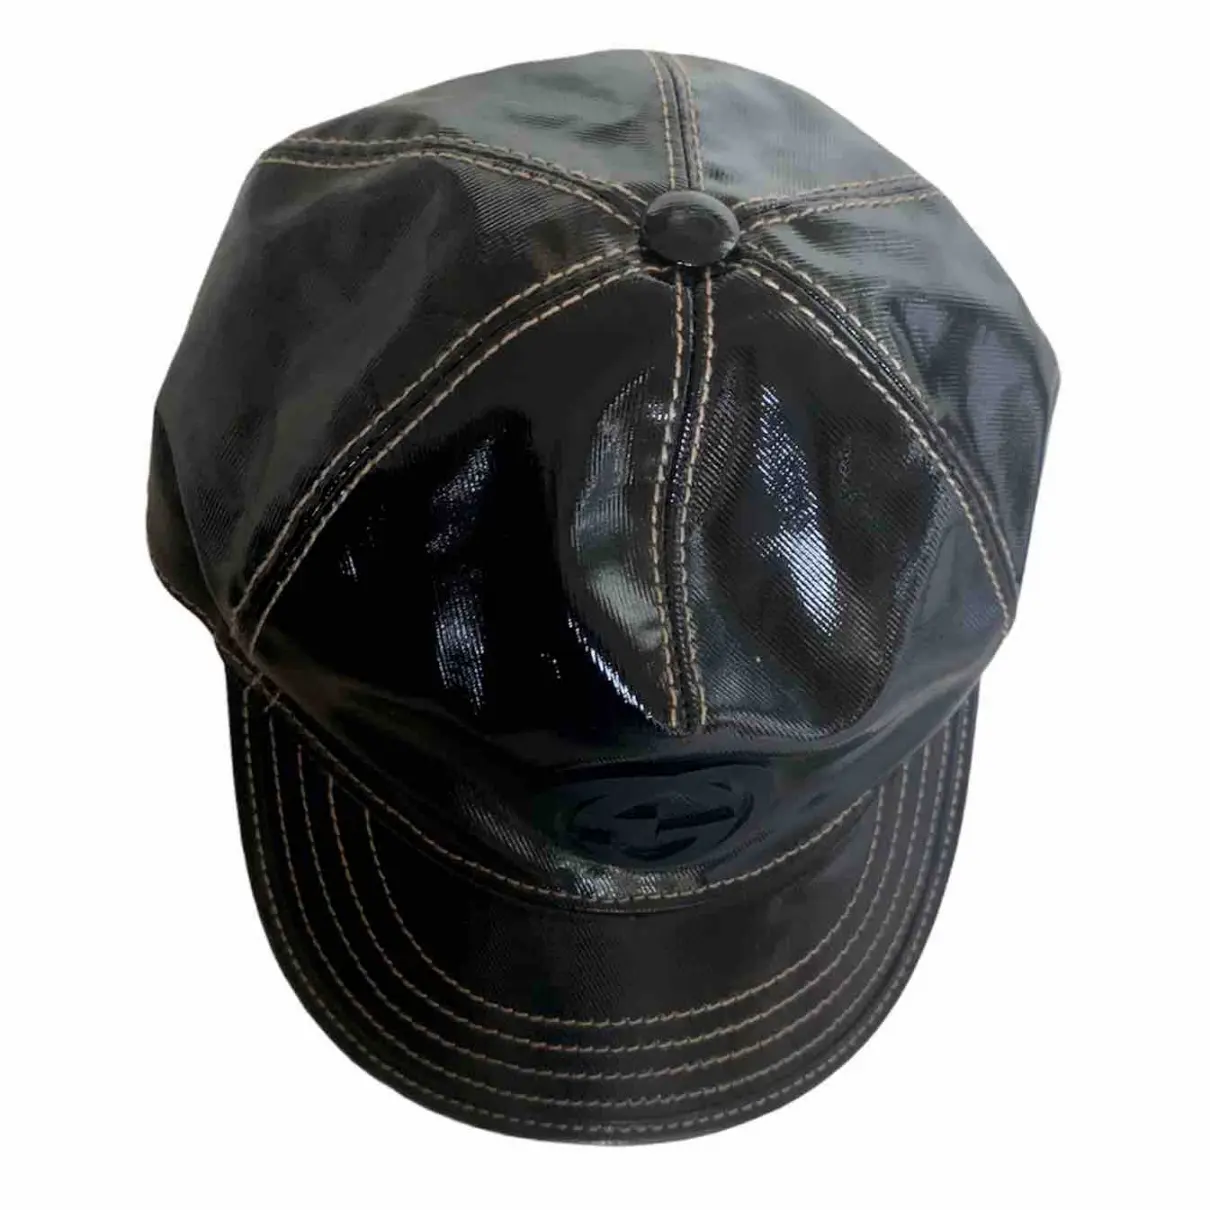 Buy Gucci Leather cap online